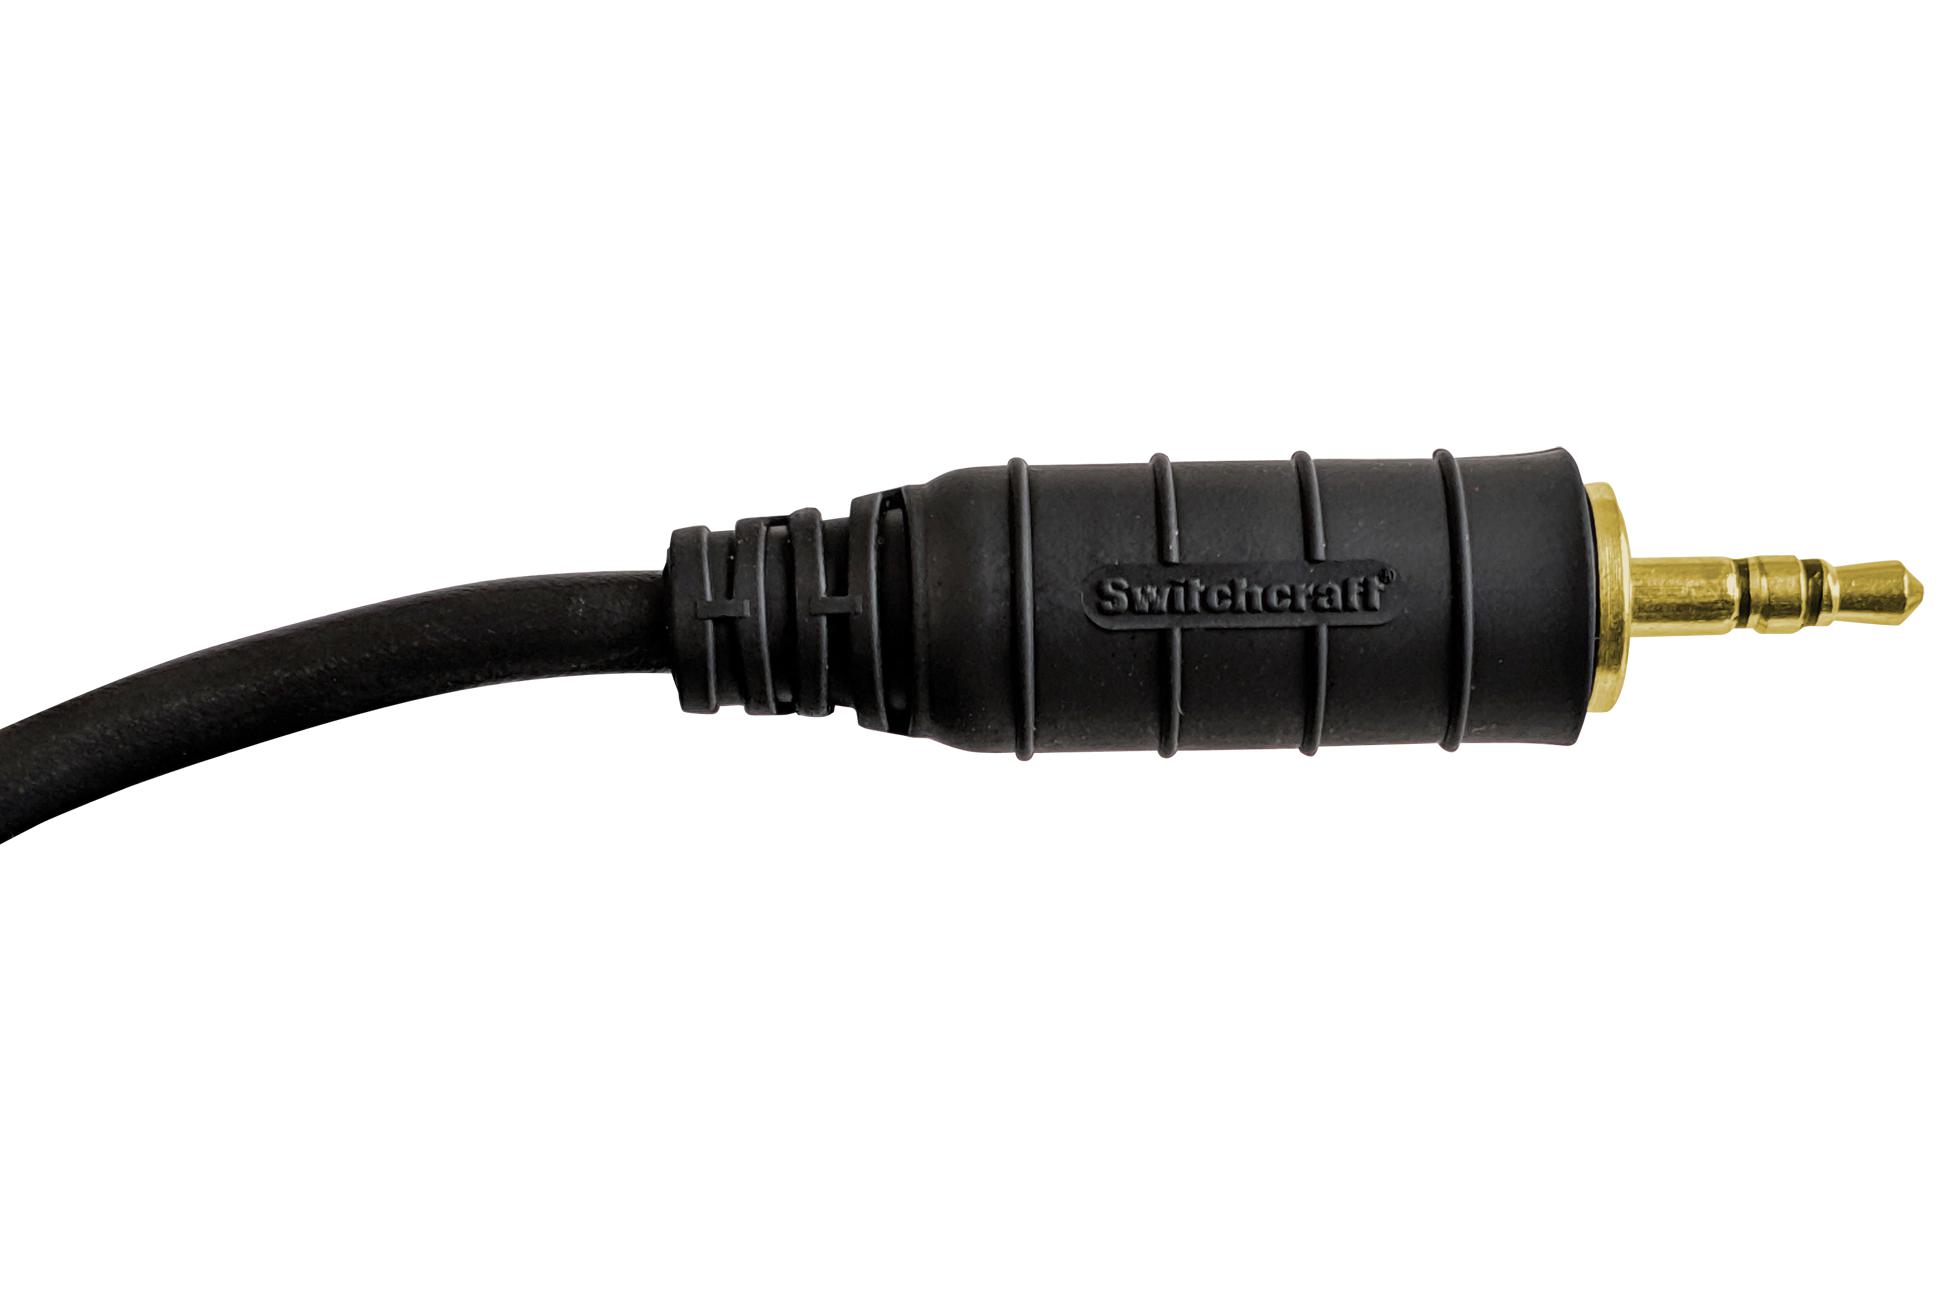 Switchcraft/conxall 35Hdsau12 3.5mm Sld Stereo Plug .12 Gold, Rohs